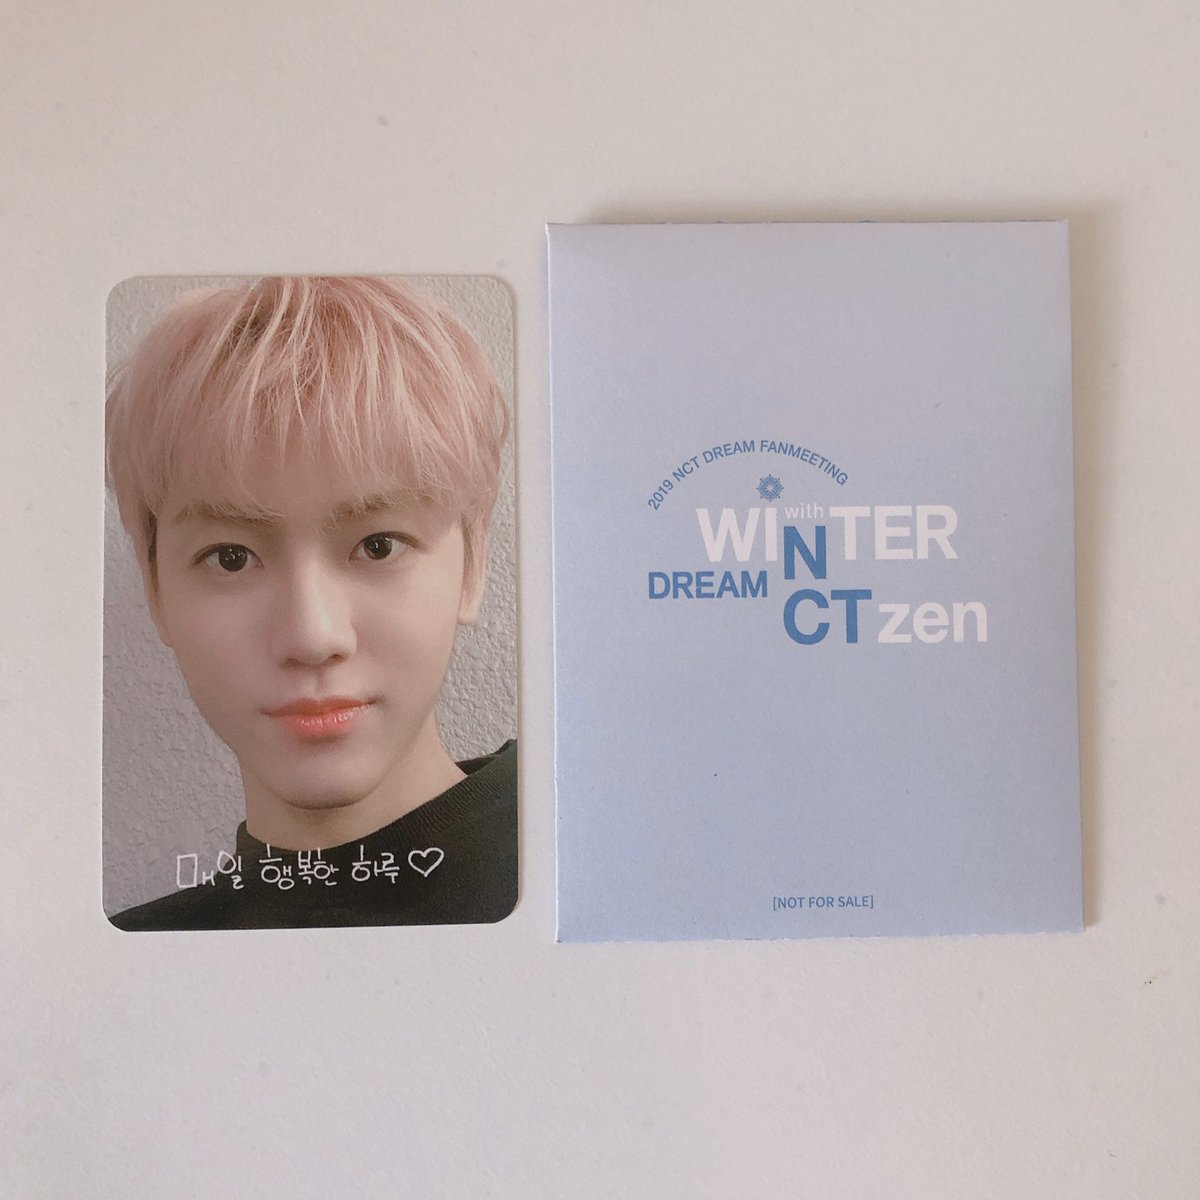 so far the best purchase of 2020  been wanting to get my hands on these for a long time now and im so happy to finally have one of my top cards which is jaemin’s winter fanmeeting pc  big big thank you  @NeoCityMNL for these ٩(๑❛ᴗ❛๑)۶  #NeoCityMNLFB